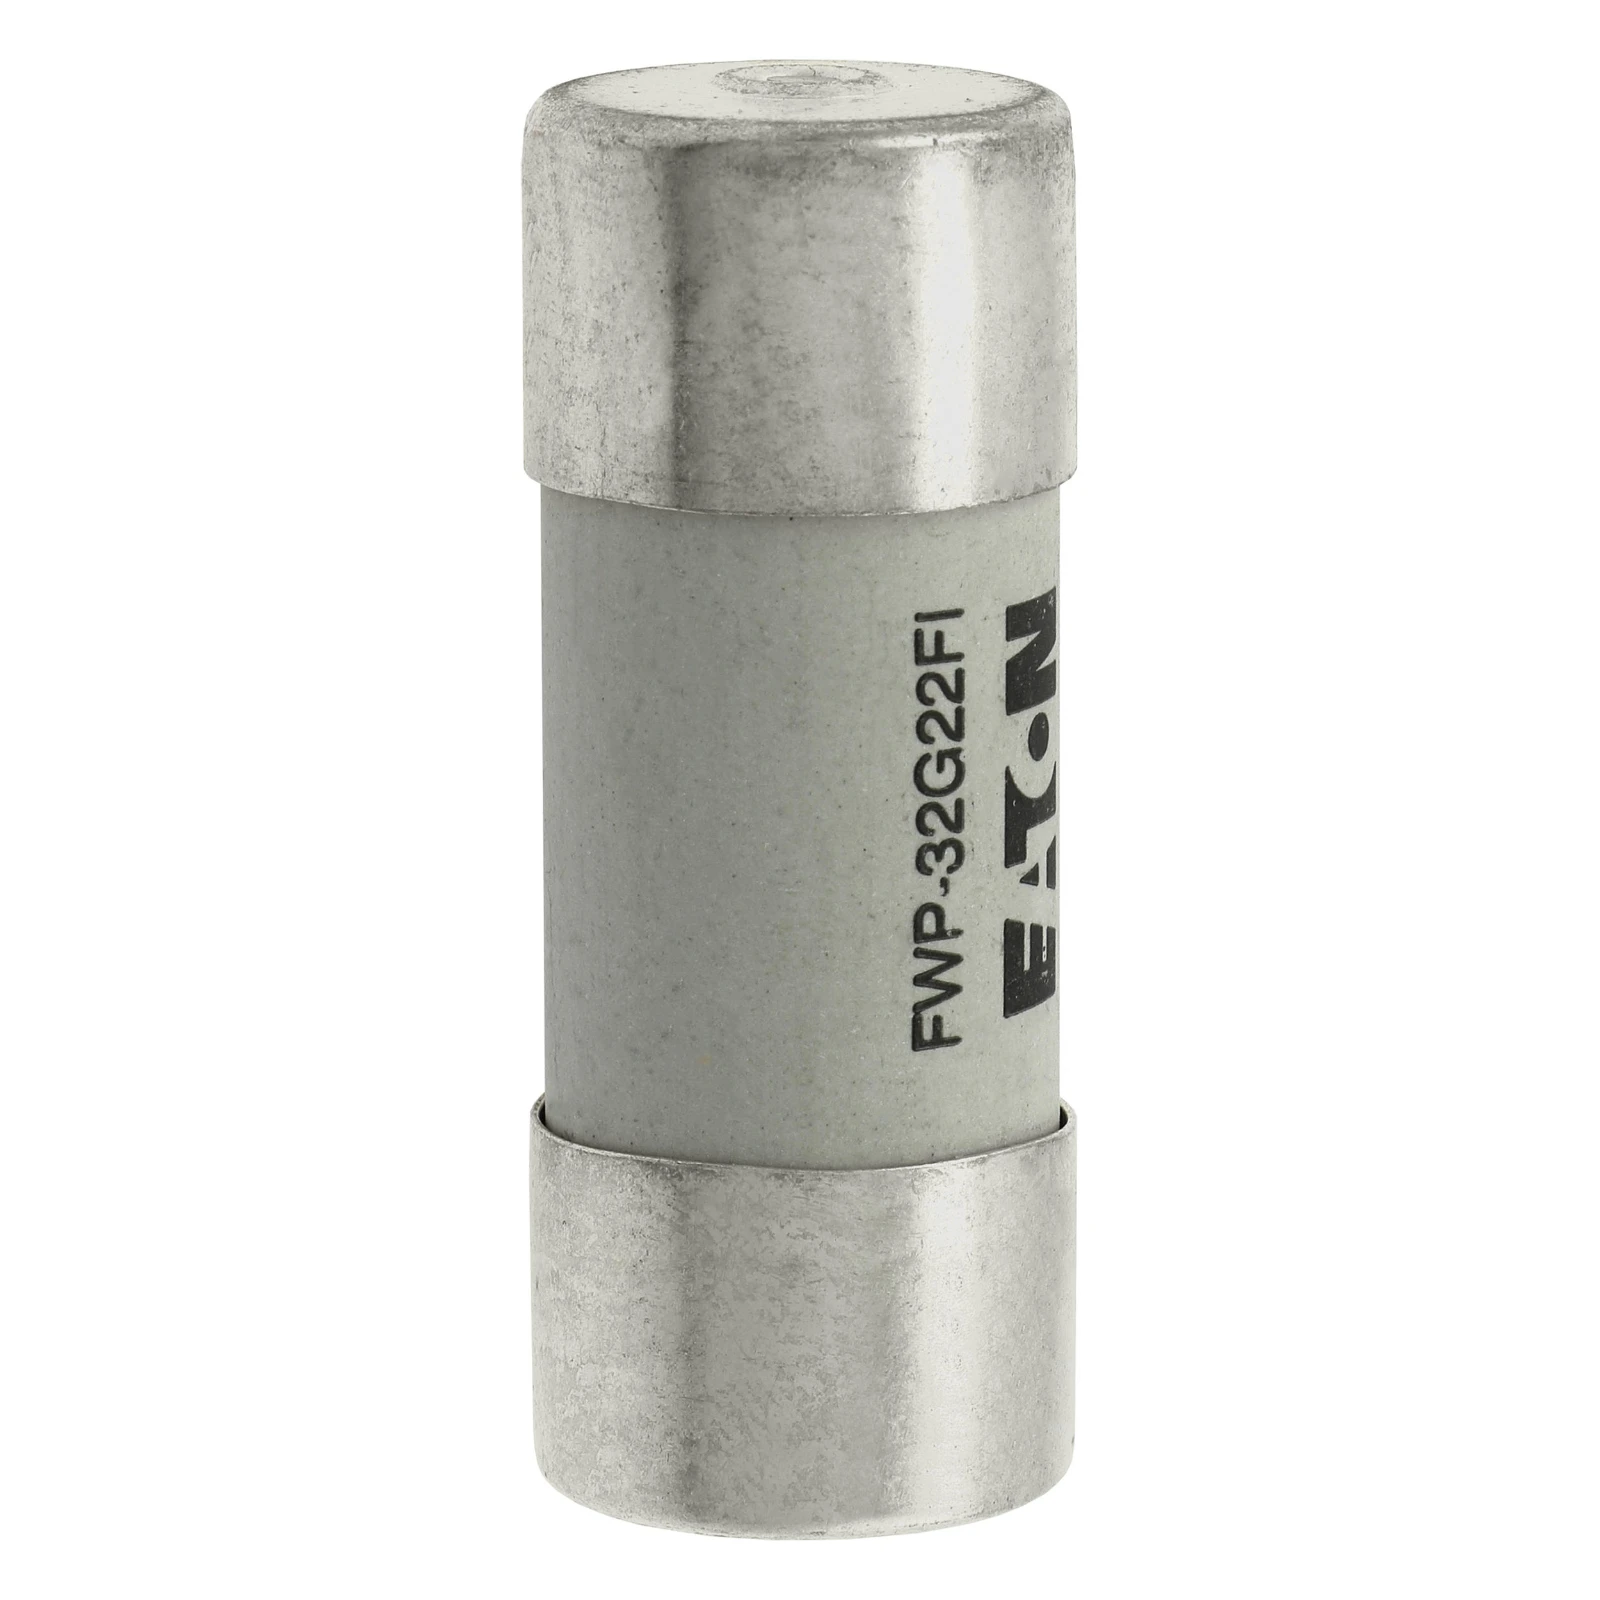 2545537 - Eaton Fuse 32A 690VAC gR 22x58 with Ind